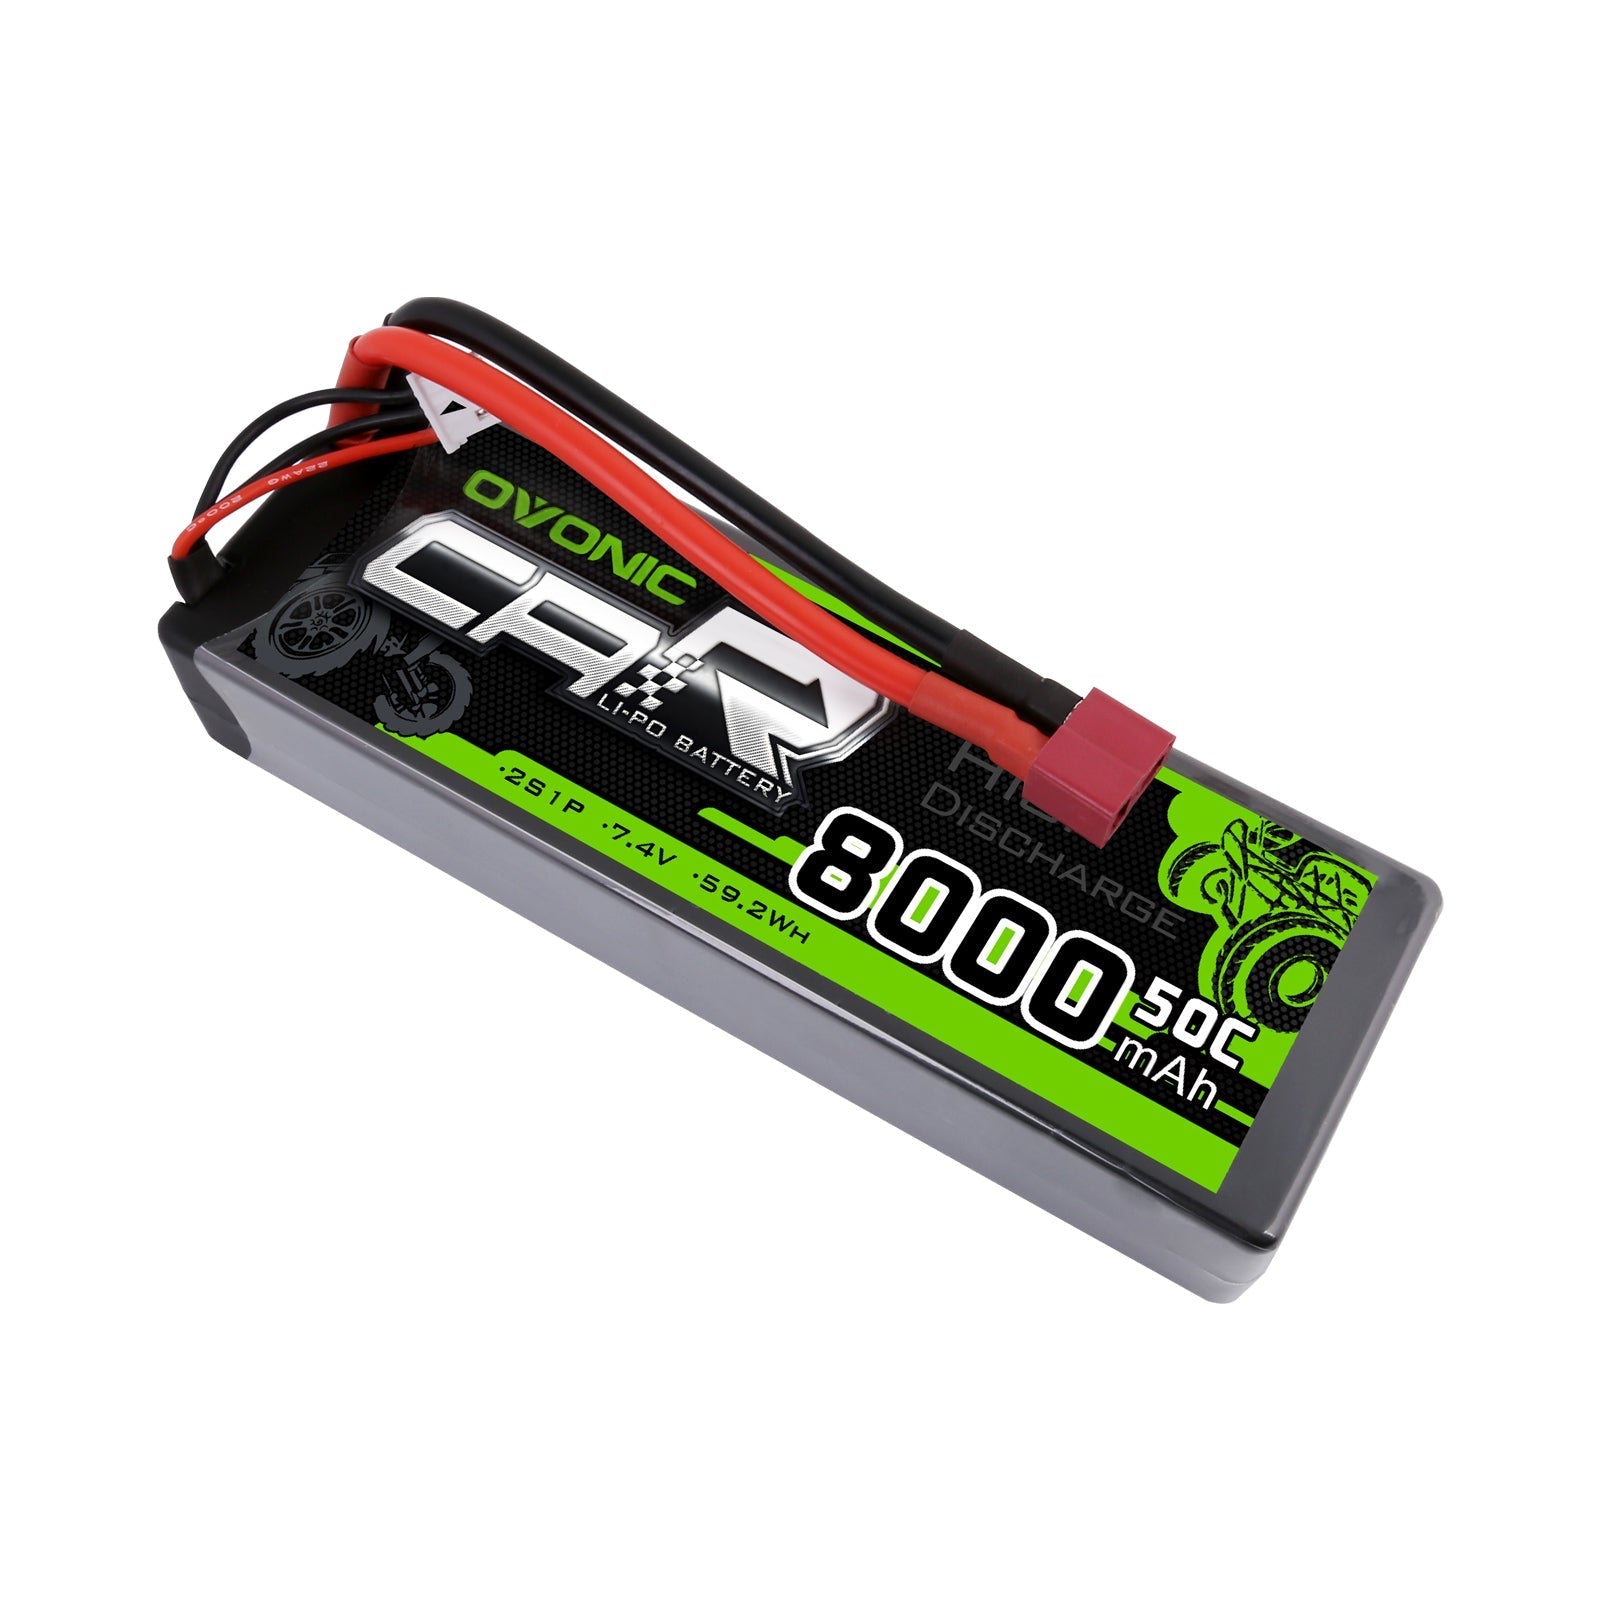 OVONIC 7.4V 50C Hardcase 2S 8000mAh LiPo Battery Pack 24# with Deans Plug - Ampow